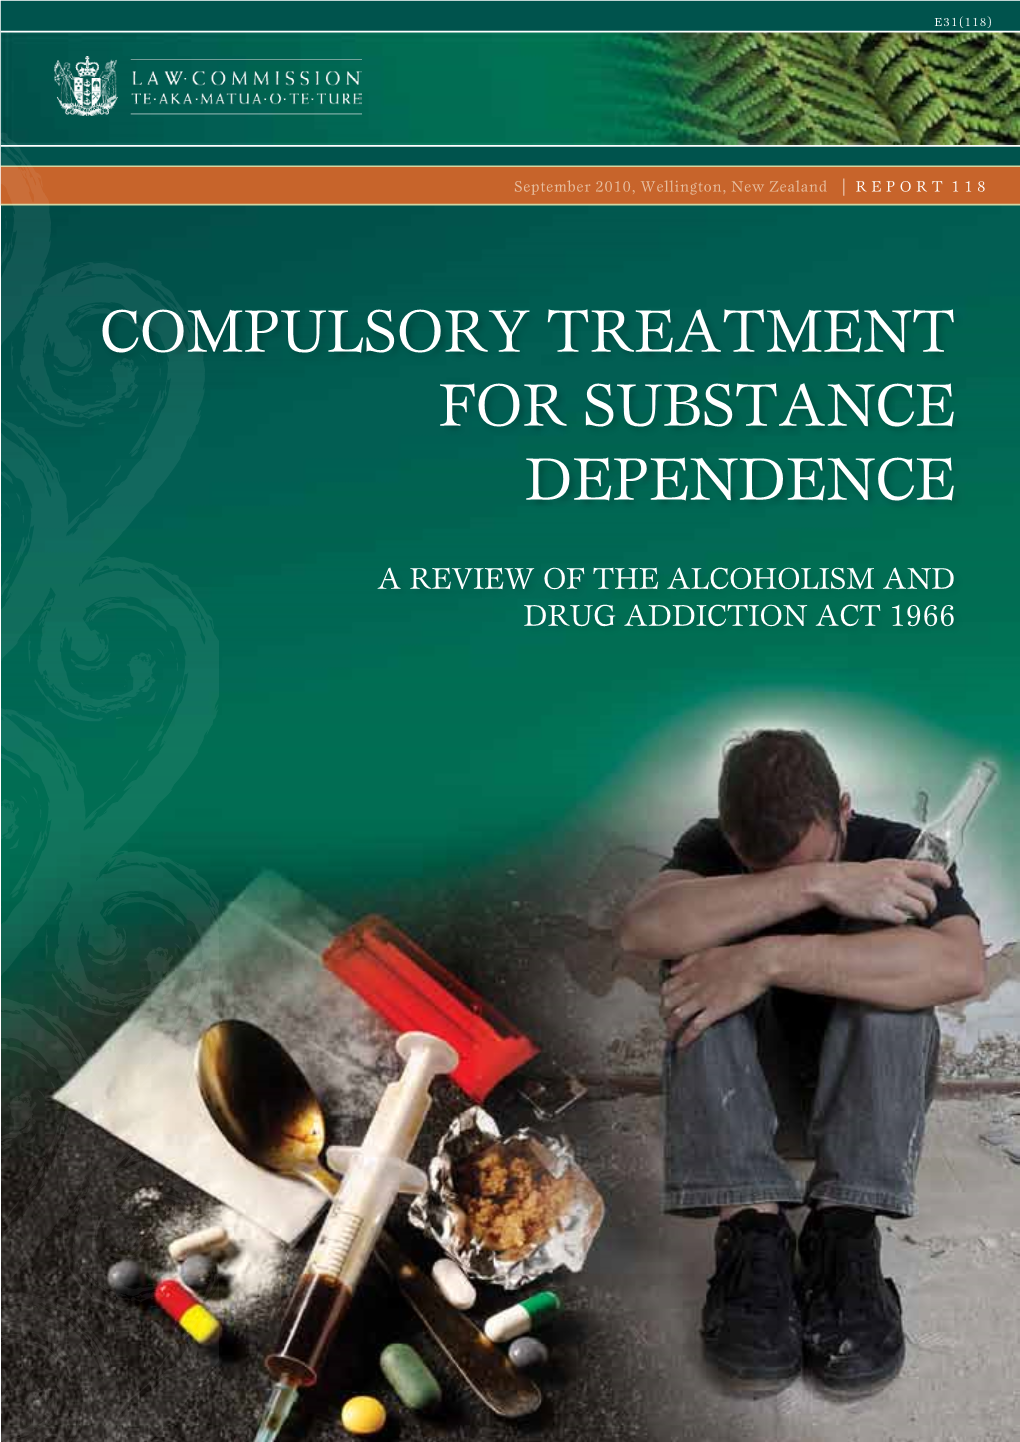 Compulsory Treatment for Substance Dependence: a Review of the Alcoholism and Drug Addiction Act 1966